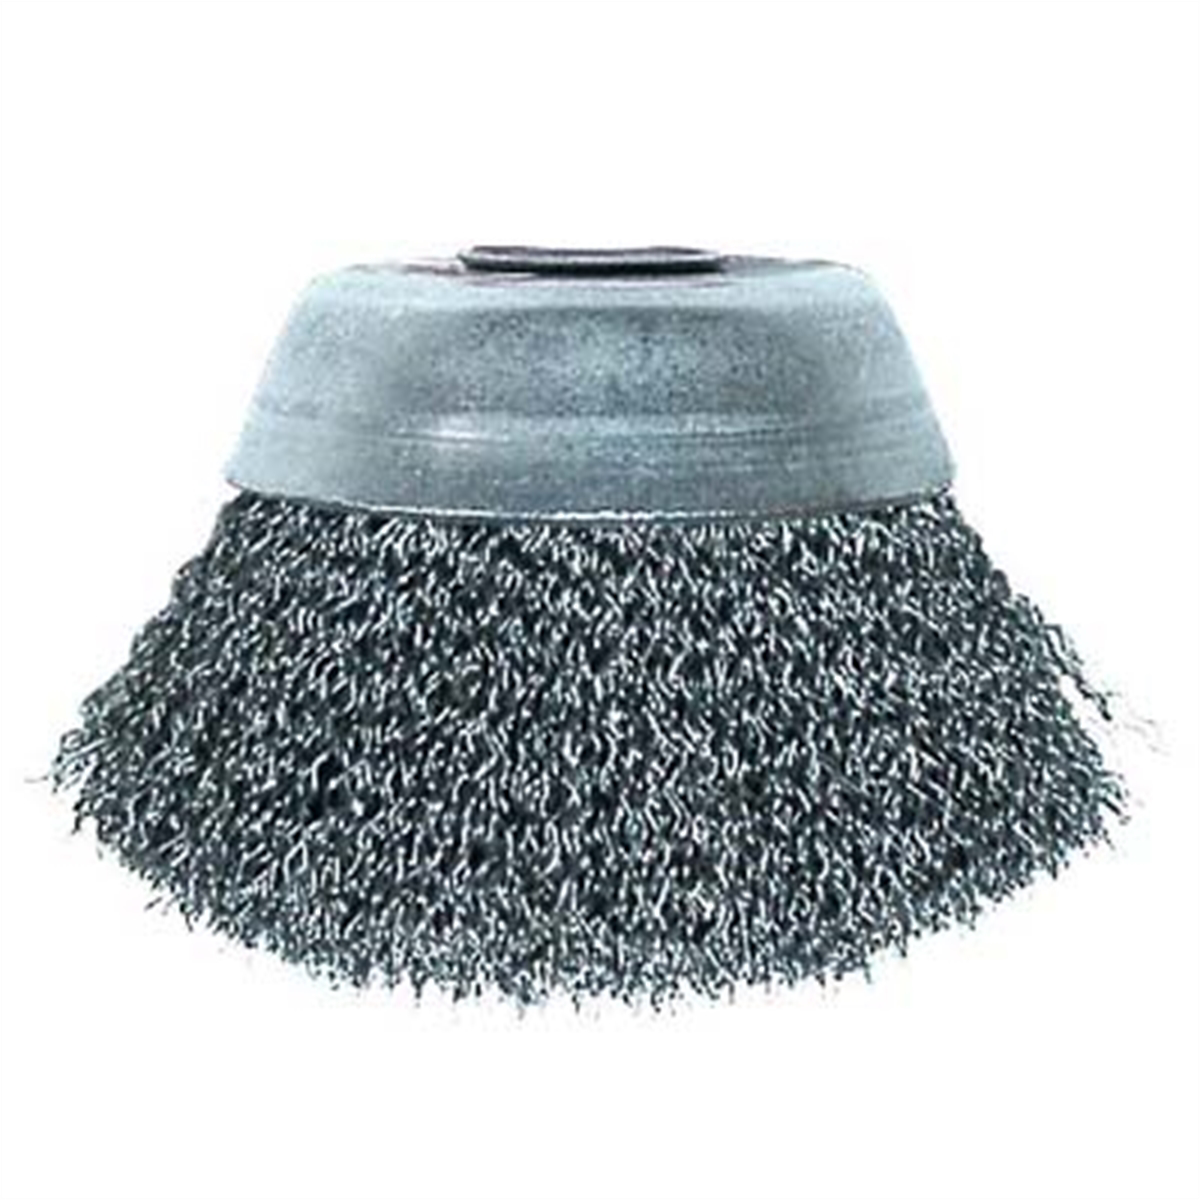 Crimped Wire Cup Brush - 3" x 5/8-11 Arbor .014 Wire